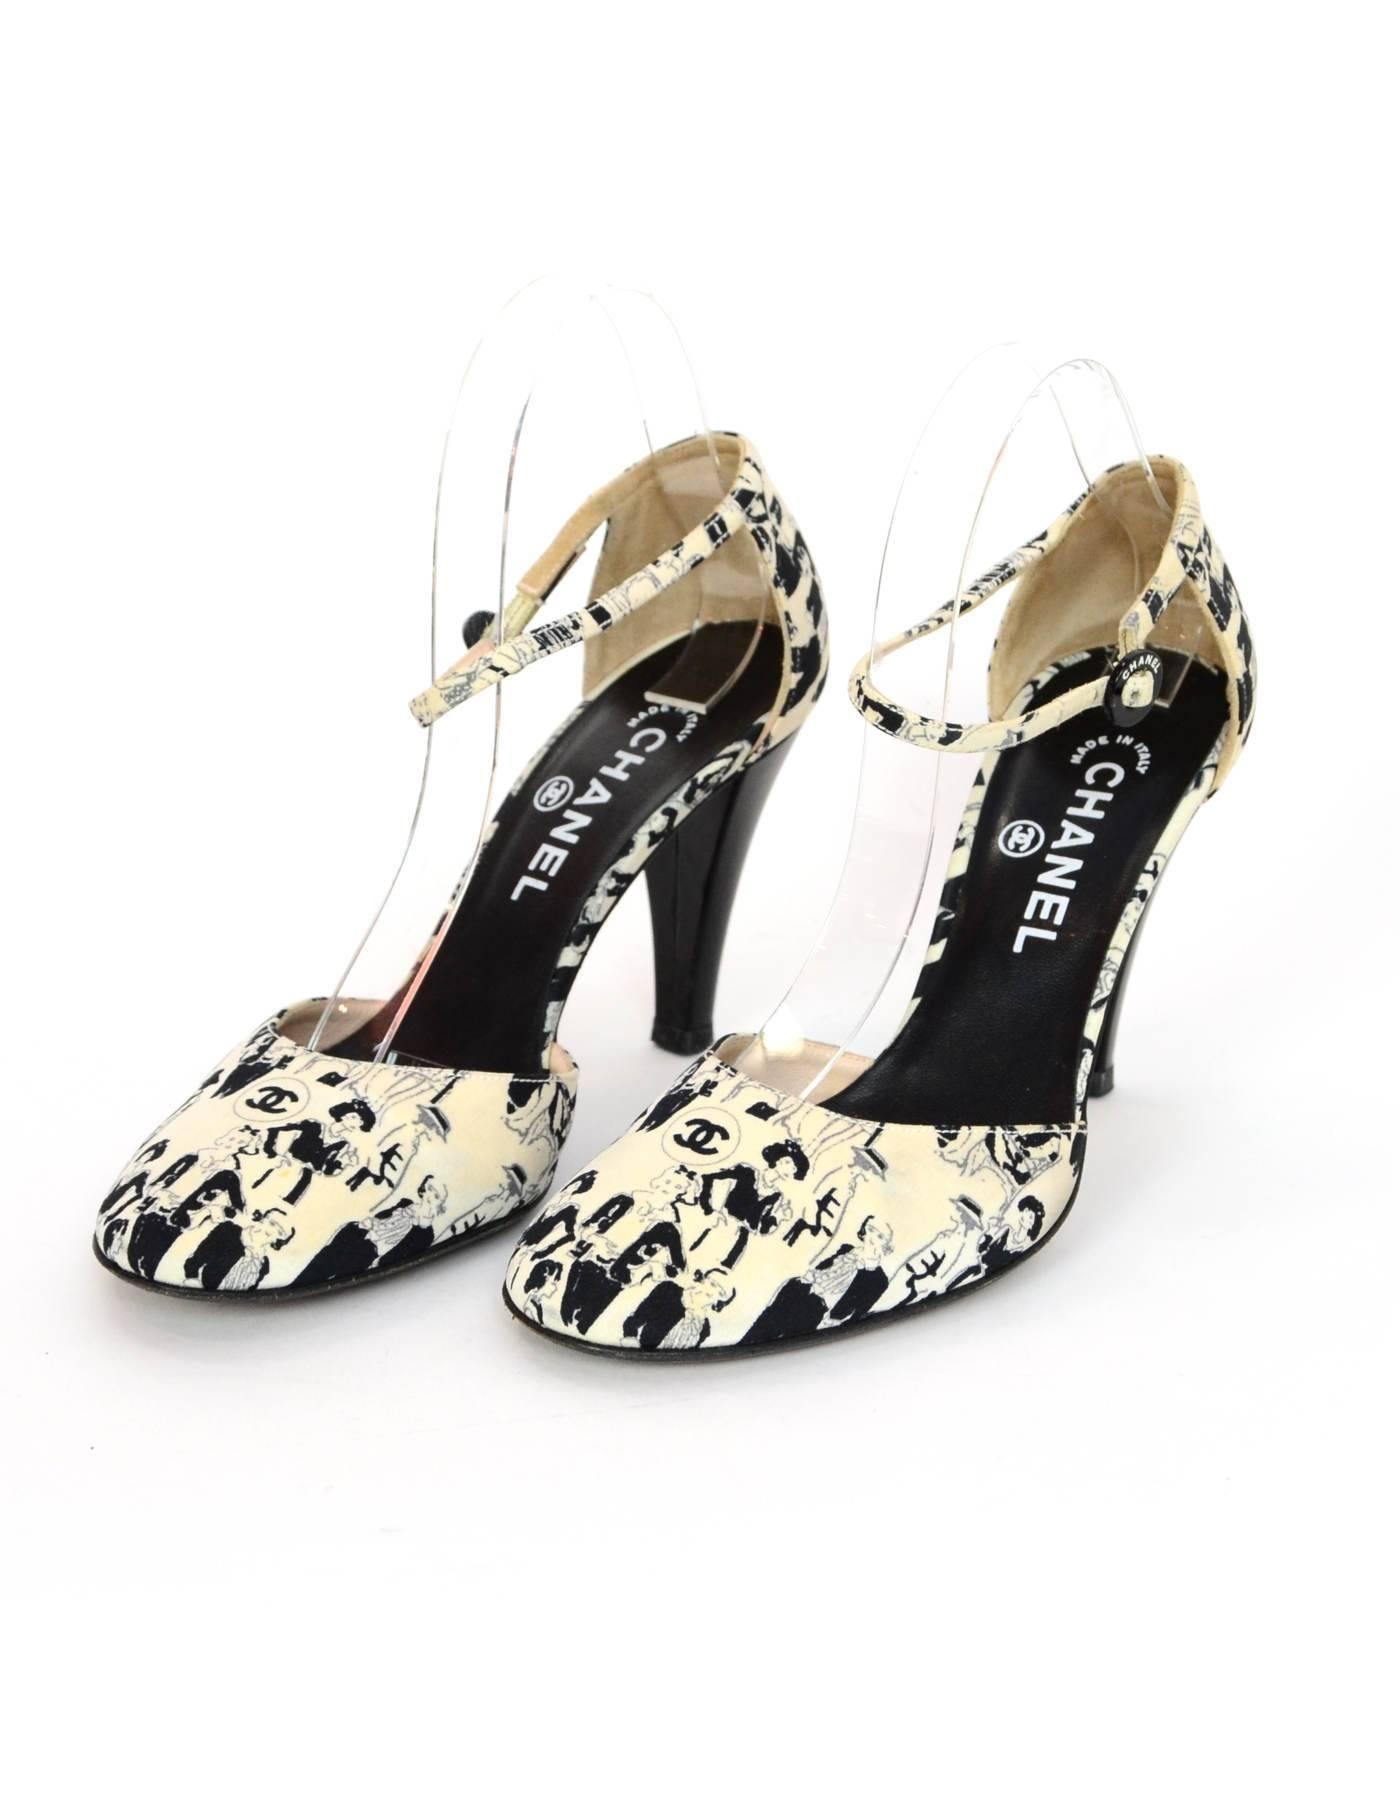 Chanel Black & White Satin Coco d'Orsay Pumps Sz 38

Made In: Italy
Color: Black, white
Materials: Satin
Closure/Opening: Buckle closure at ankle
Sole Stamp: CC Made in Italy 38
Overall Condition: Excellent pre-owned condition with the exception of